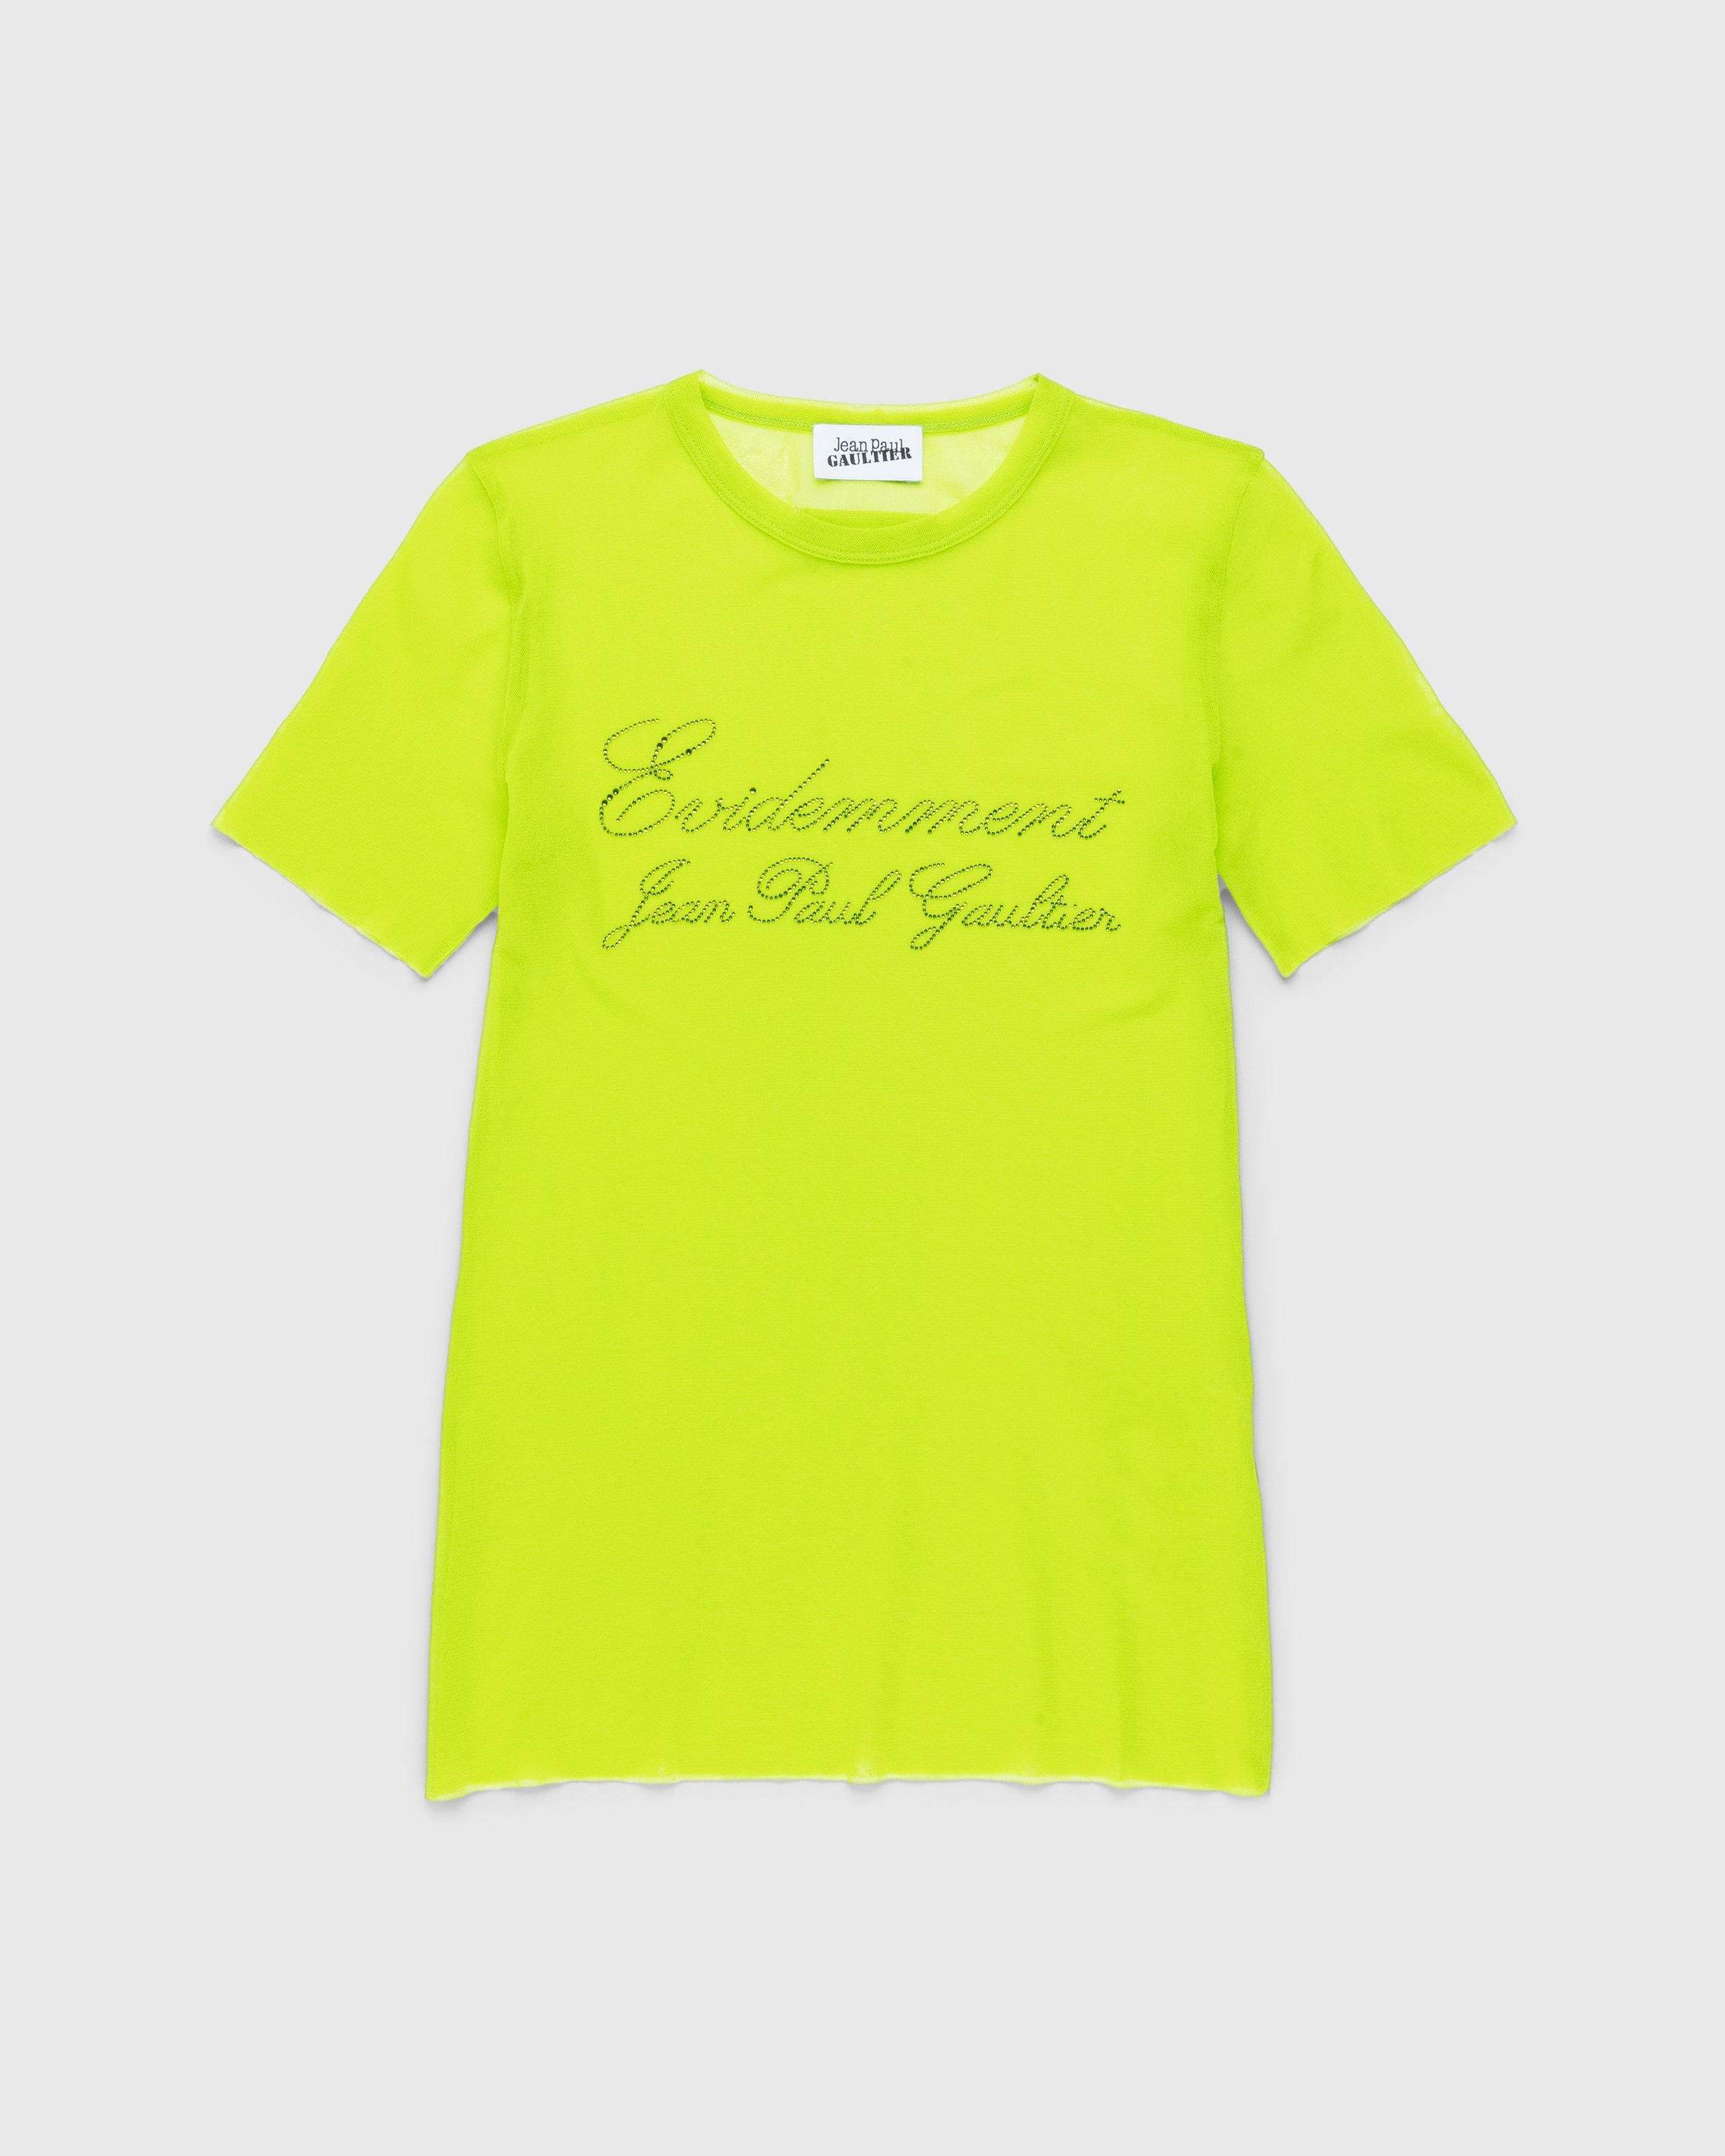 Jean Paul Gaultier - Évidemment Tulle T-Shirt Lime Green - Clothing - Green - Image 1